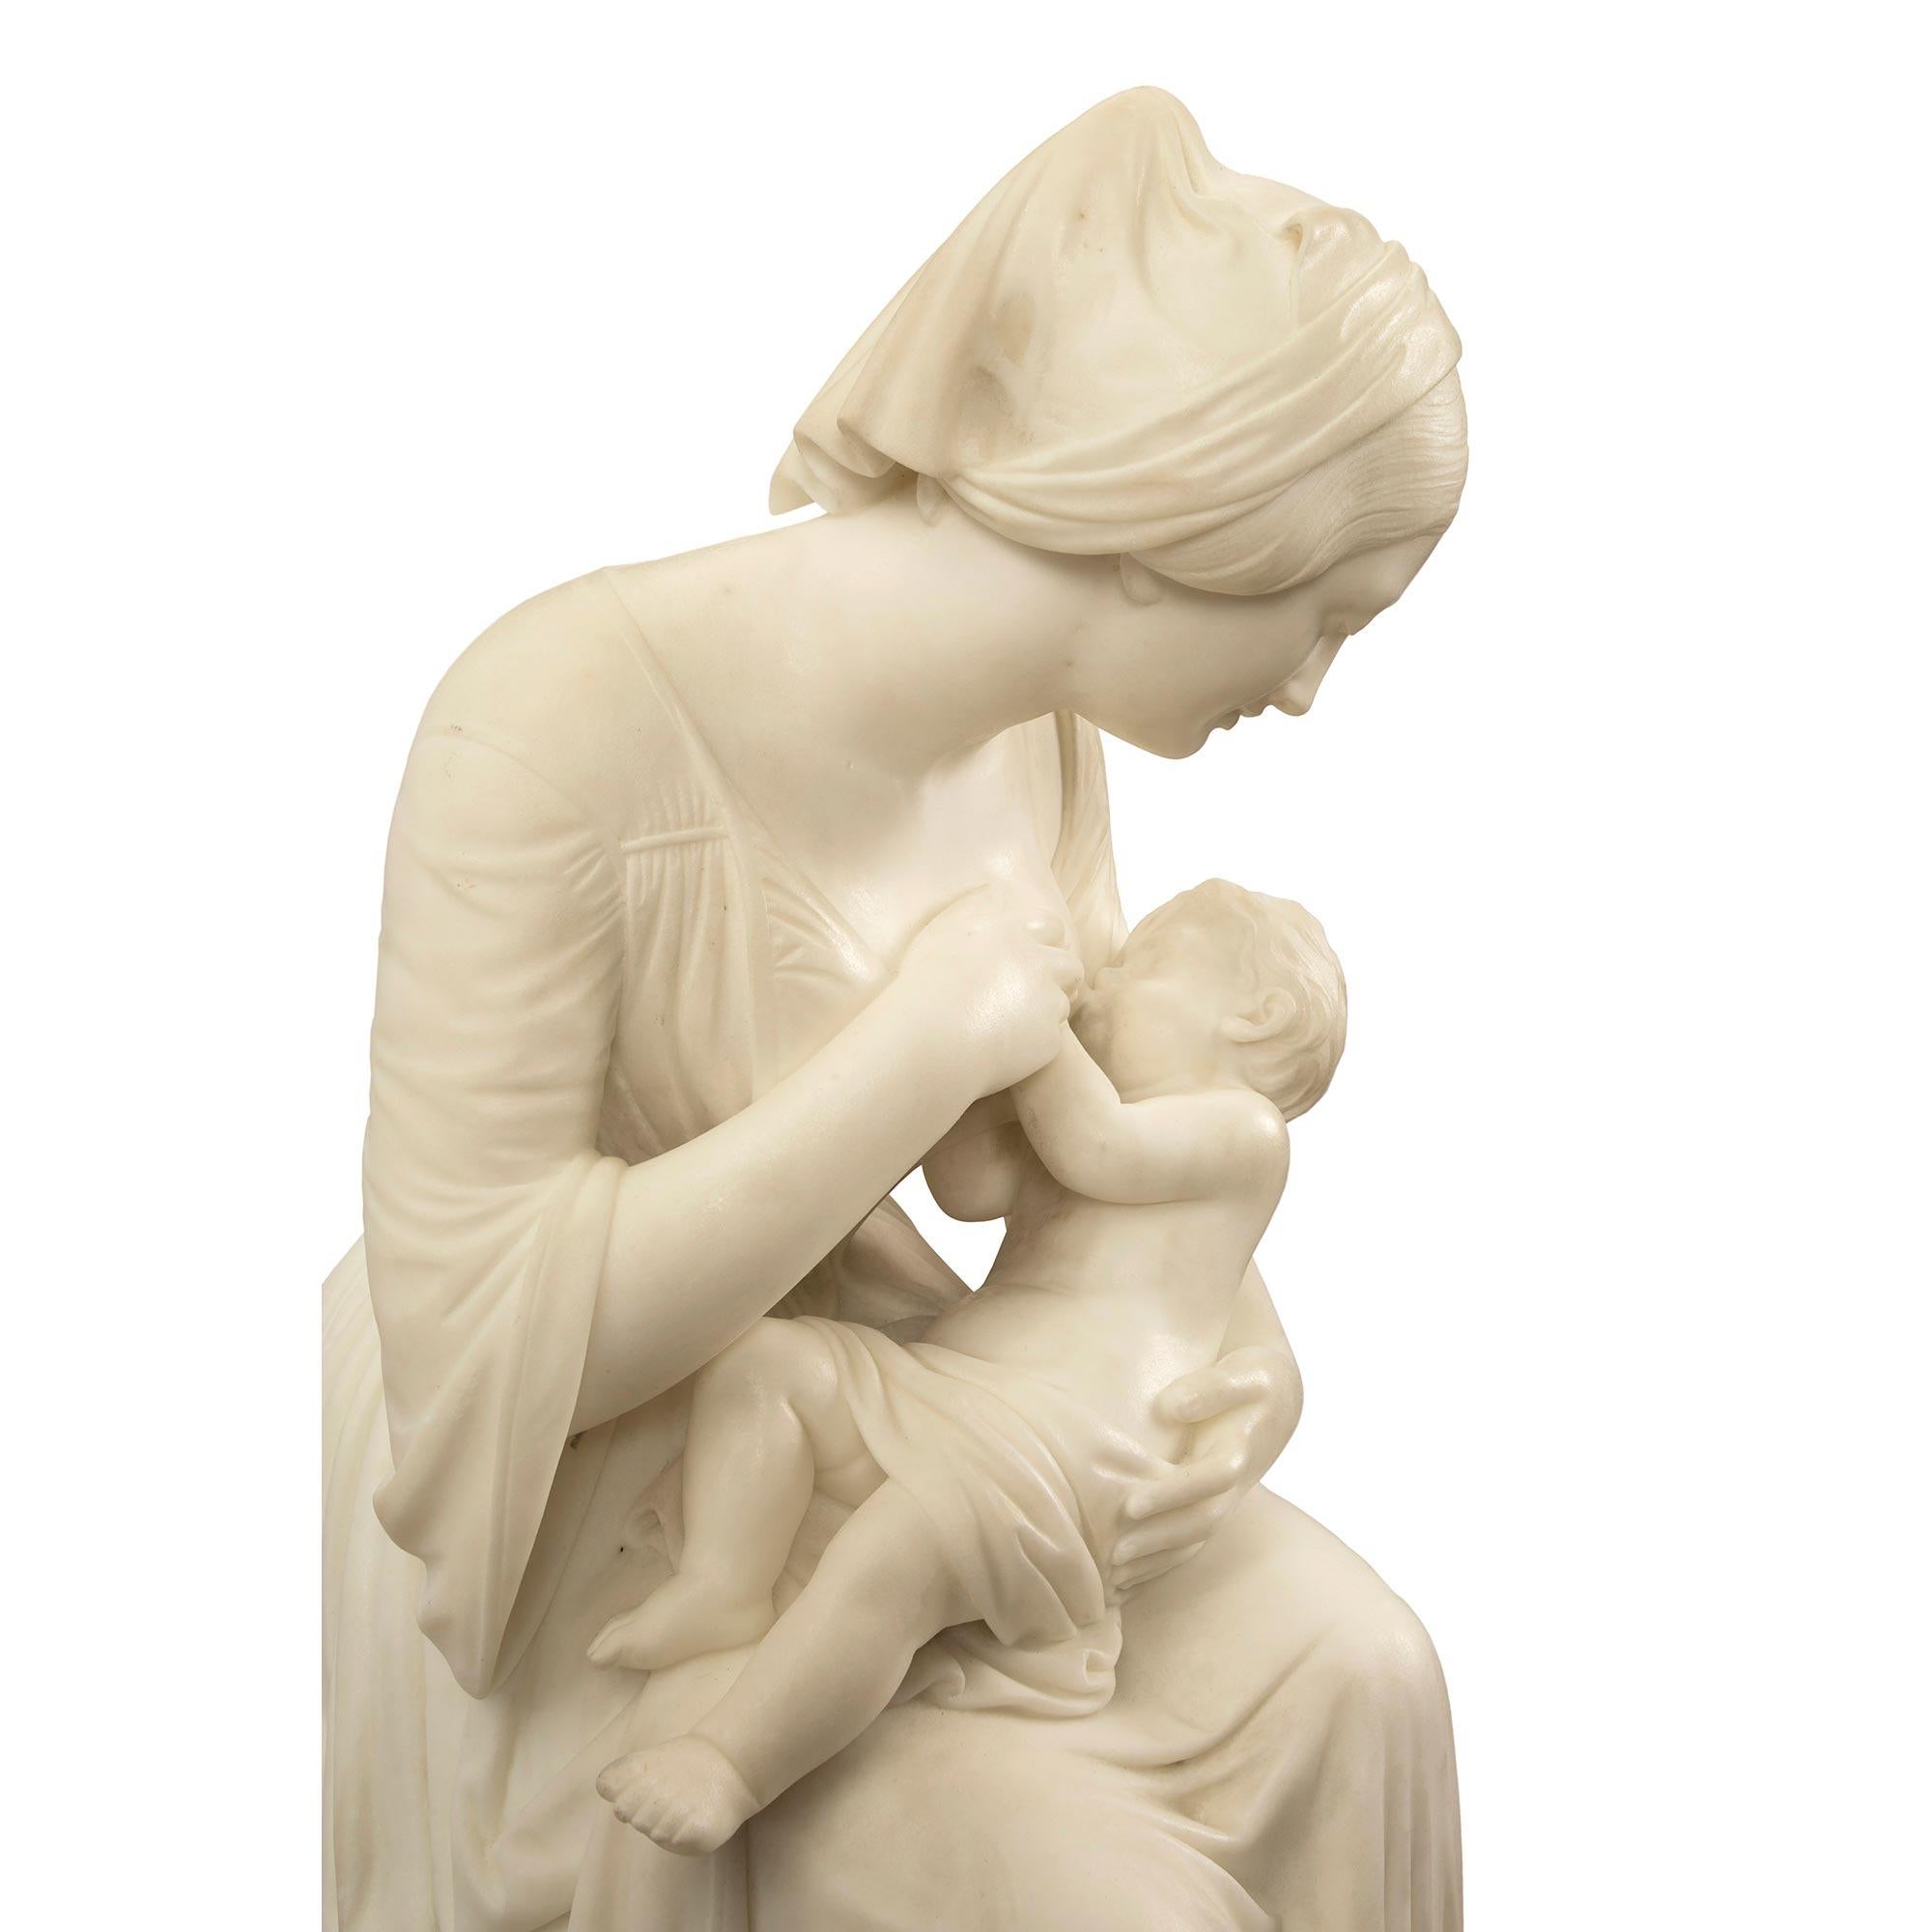 Italian 19th Century Carrara Marble Statue of Mother and Child, Signed Franchi For Sale 3